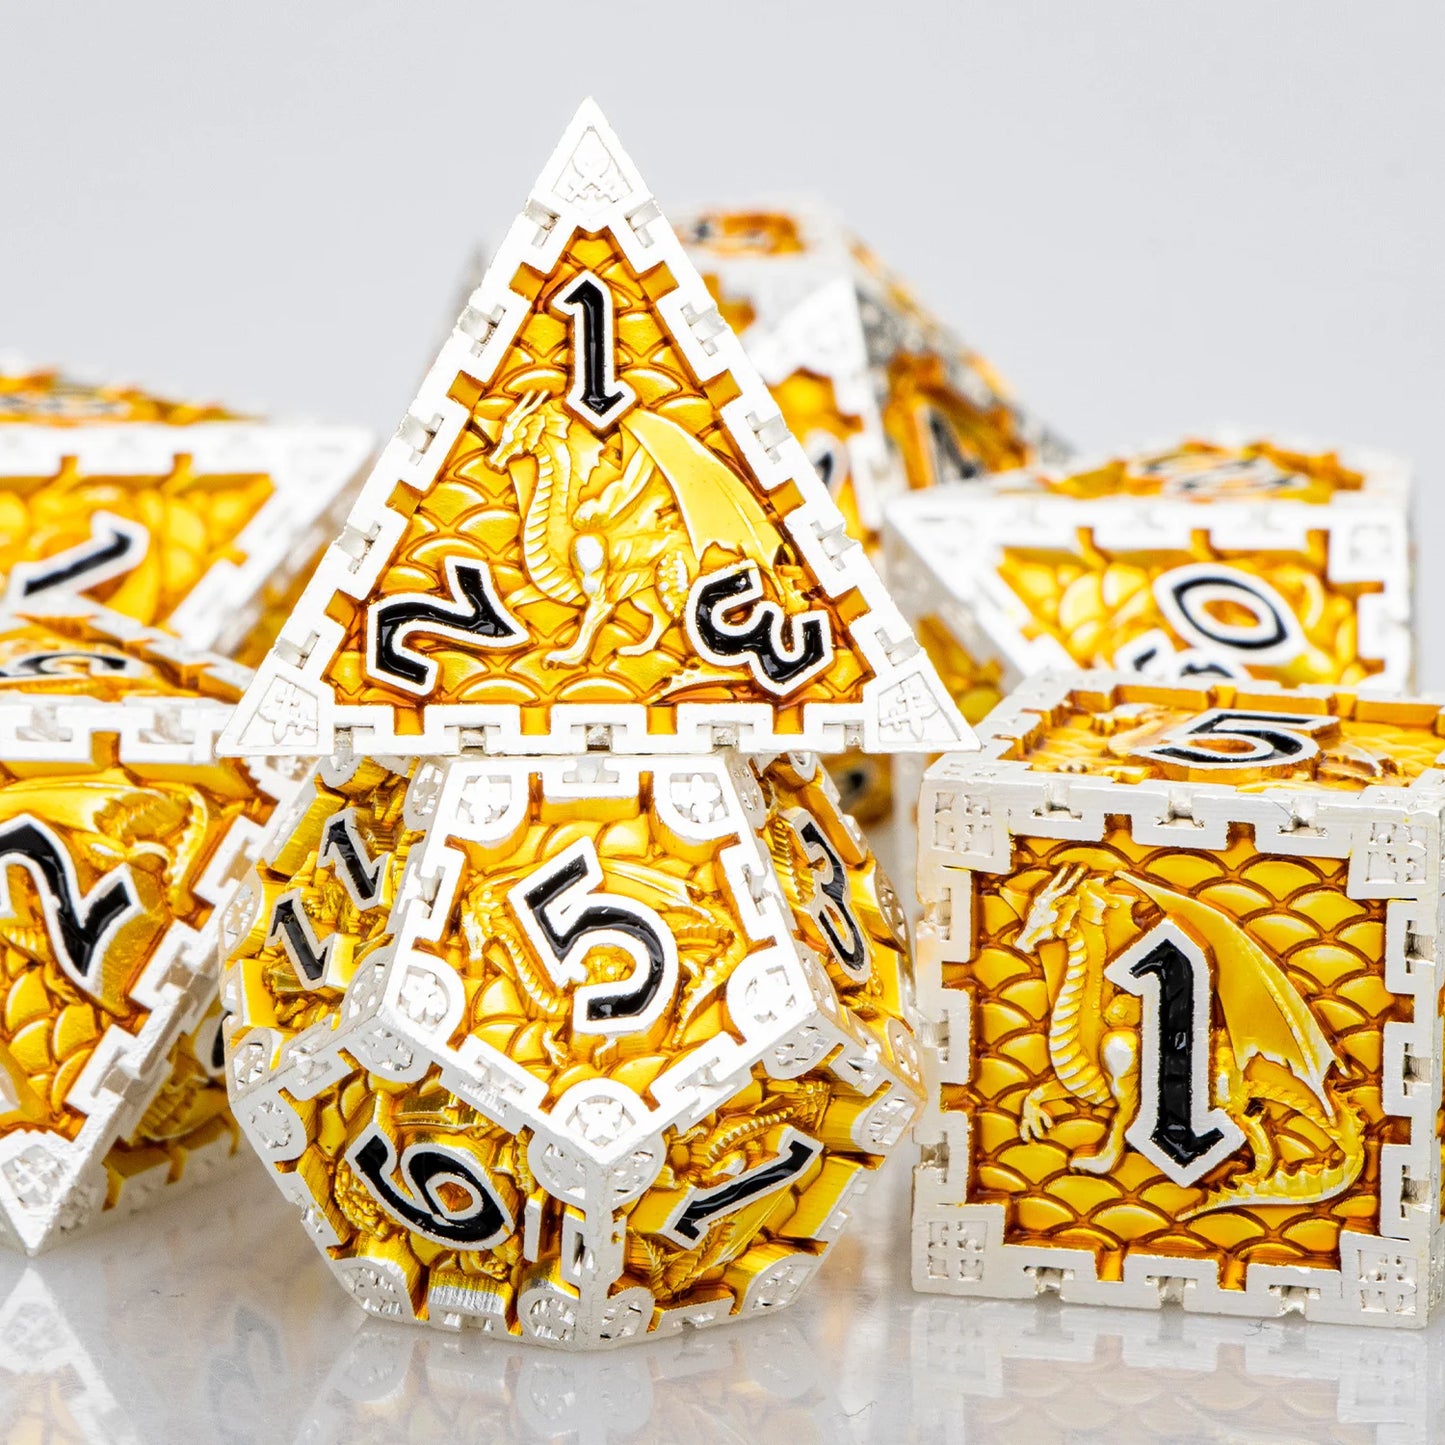 DND 20 Sided Metal RPG Polyhedral Gold Dragon D+D D20 Dice Set For Dungeon and Dragon Pathfinder Tabletop Role Playing Game